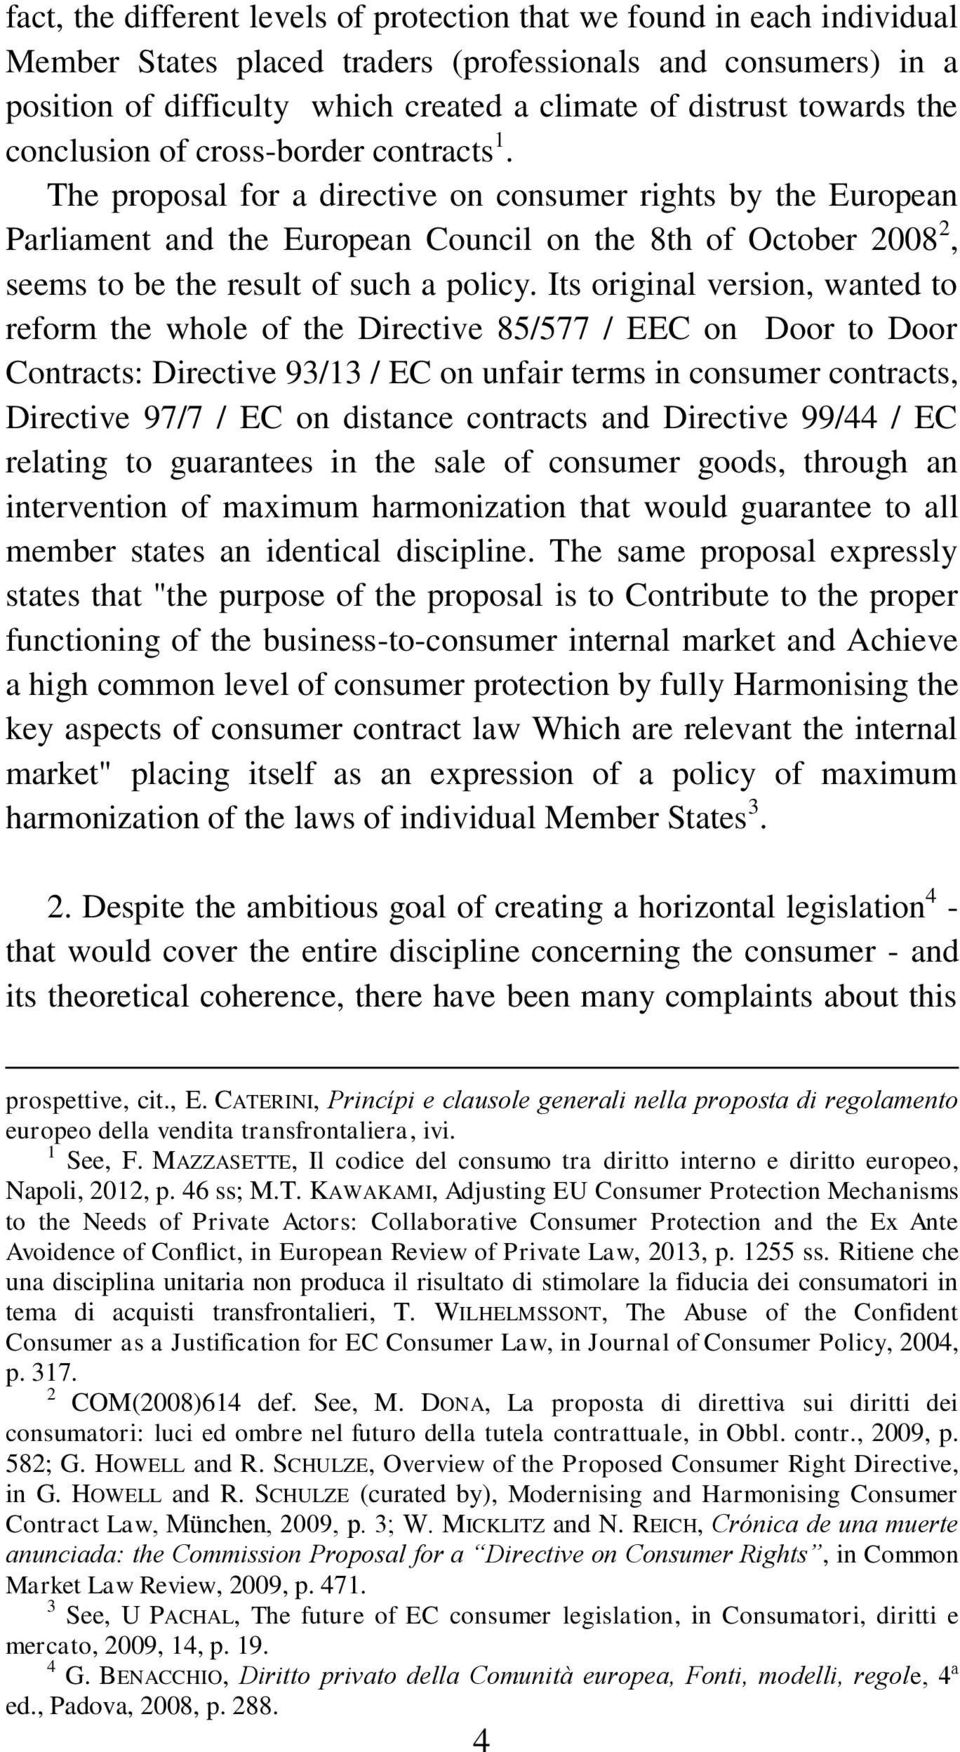 The proposal for a directive on consumer rights by the European Parliament and the European Council on the 8th of October 2008 2, seems to be the result of such a policy.